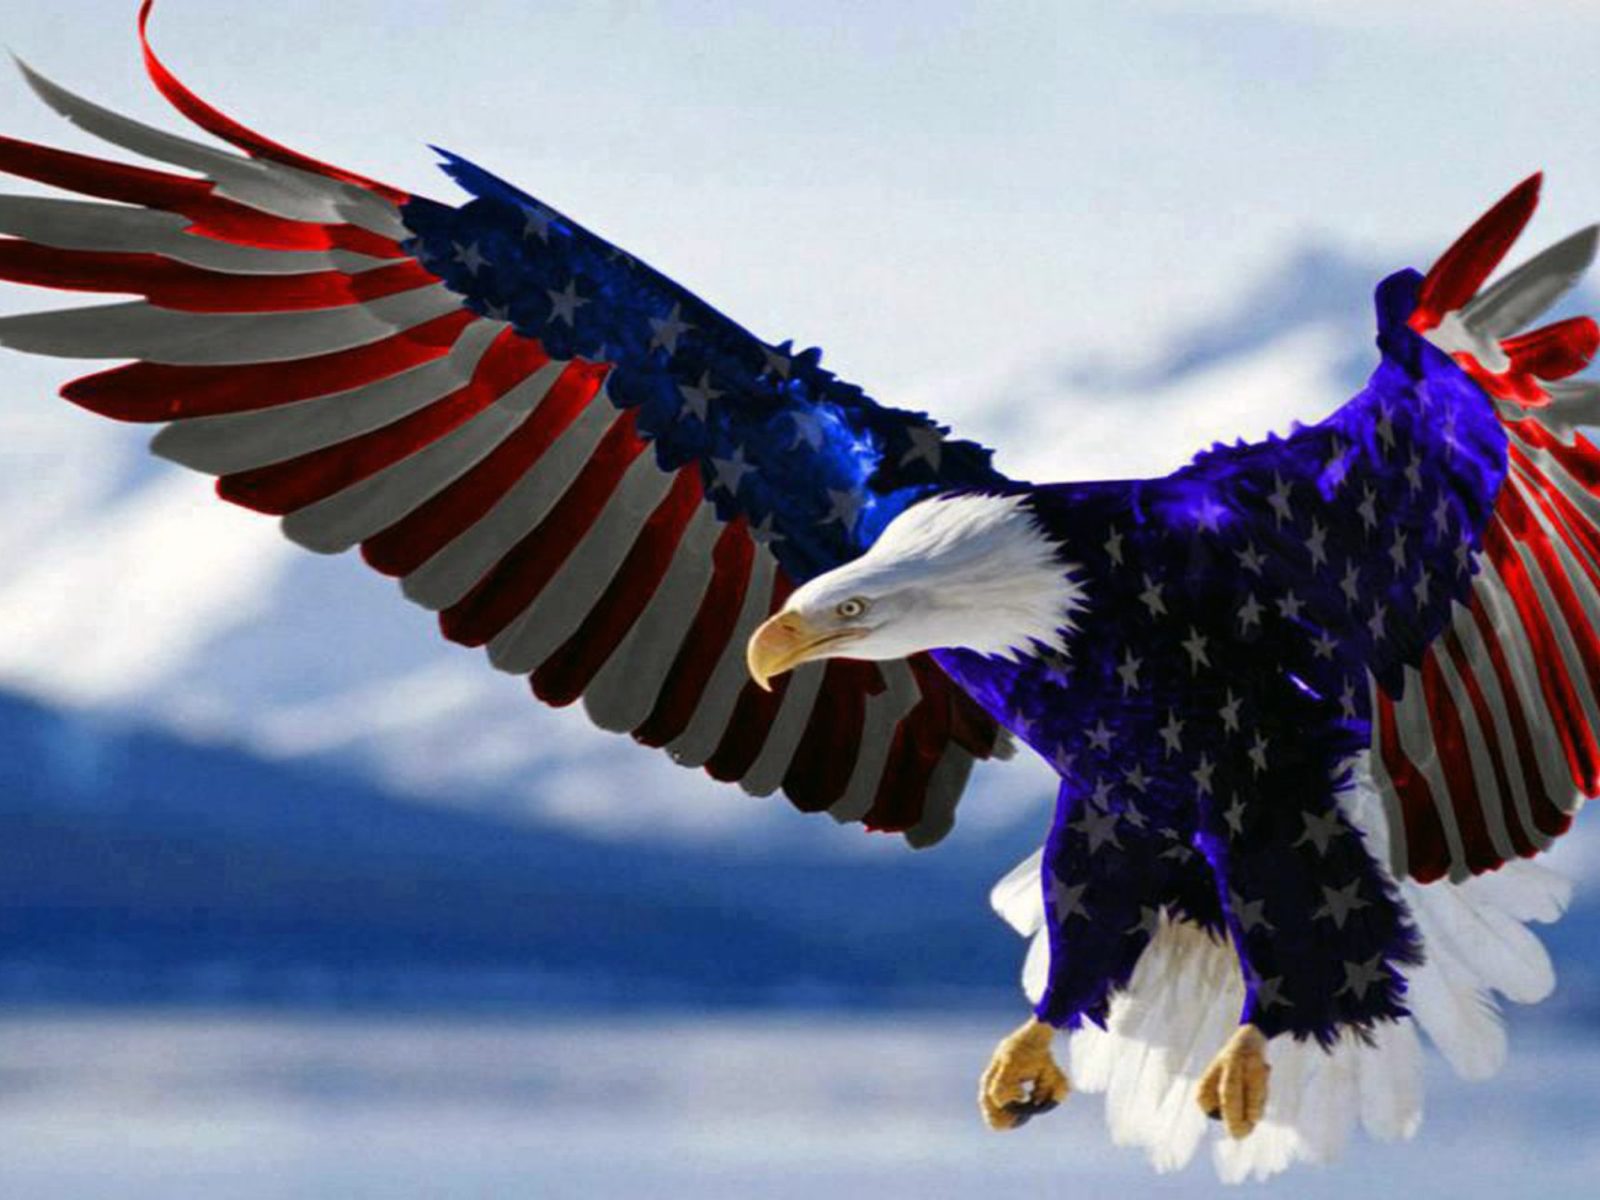 Bald Eagle American Flag HD Wallpaper For Mobile Phones Tablet And Pc 2560x1600, Wallpaper13.com